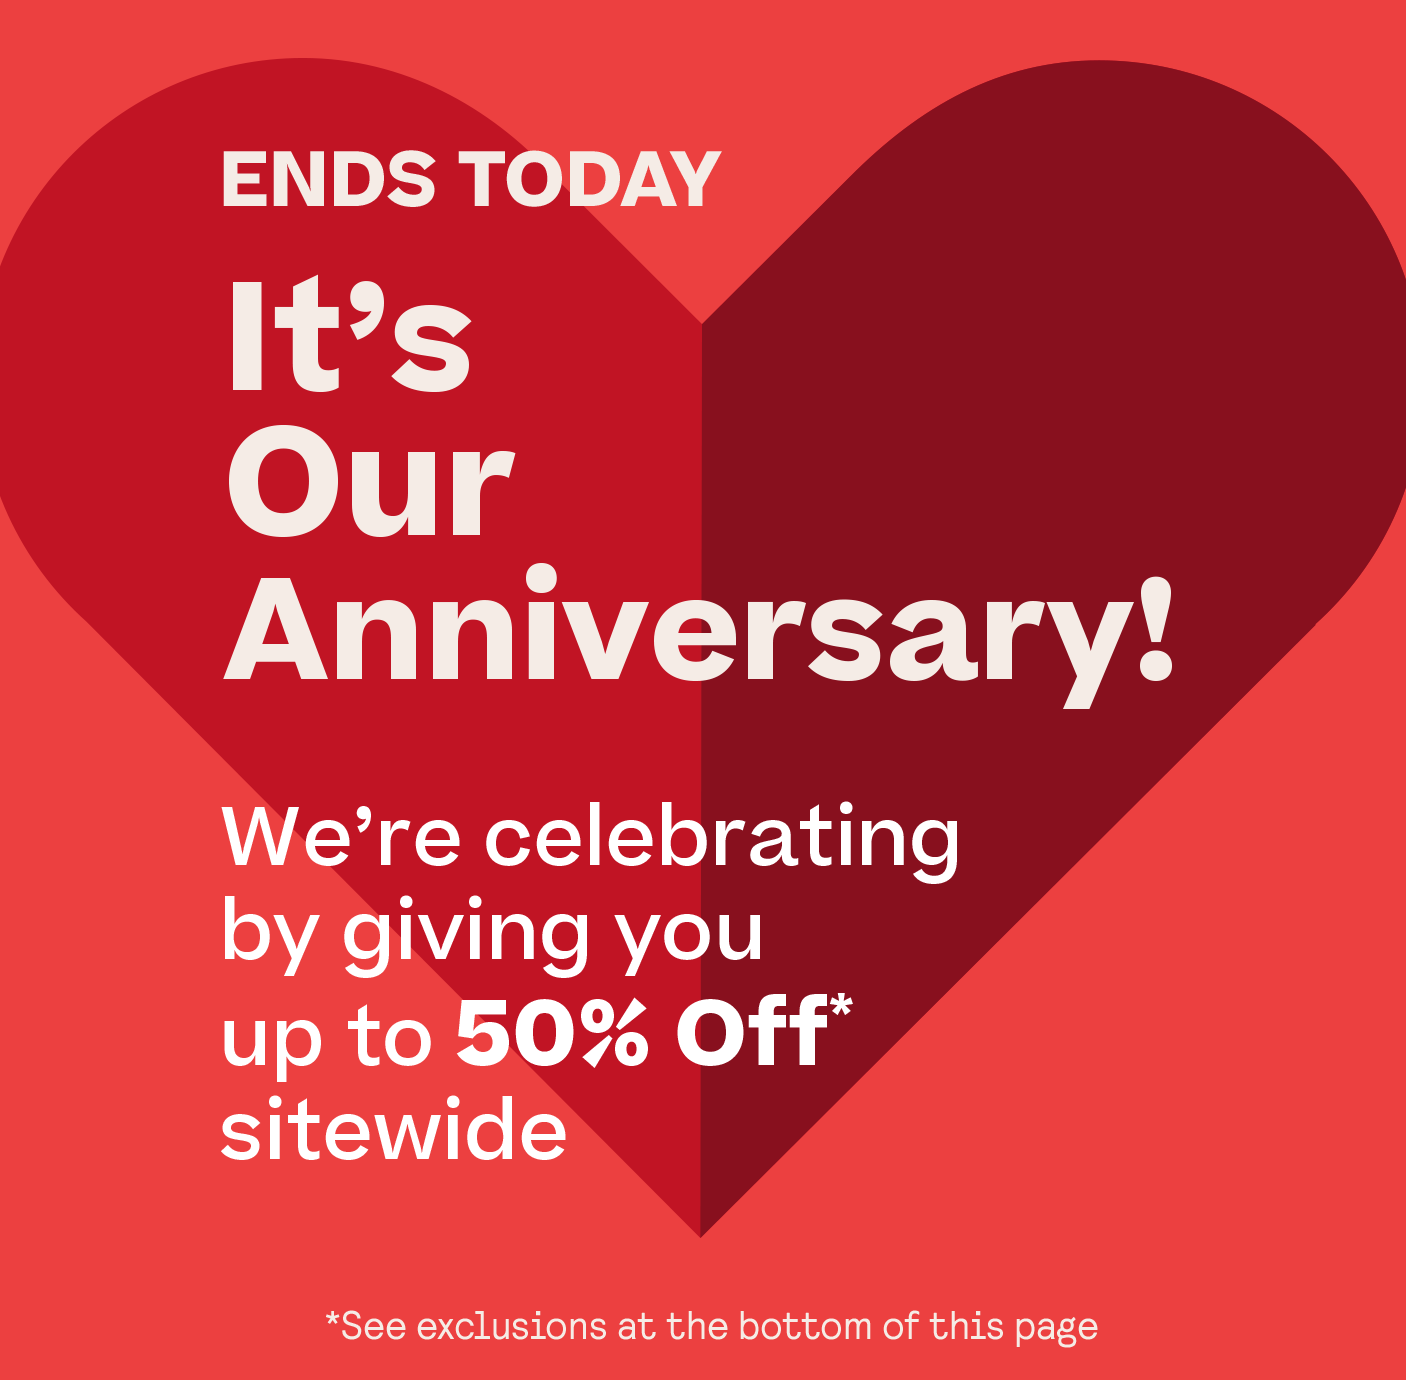 Shop Our Anniversary Sale up to 50% Off* - Ends Today